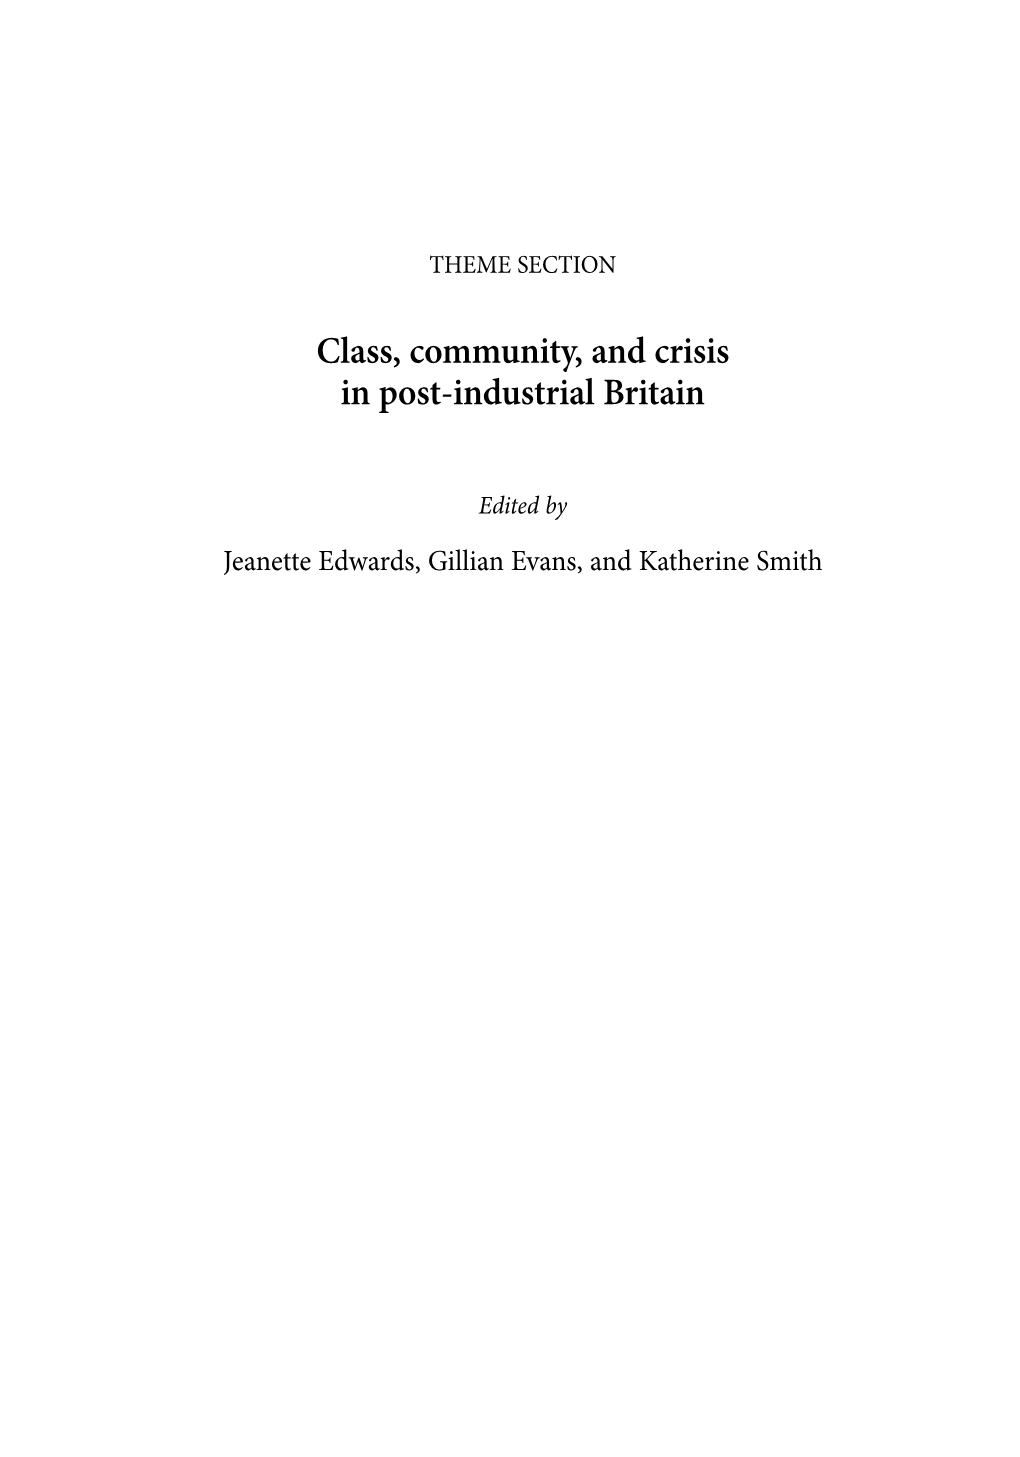 Class, Community, and Crisis in Post-Industrial Britain